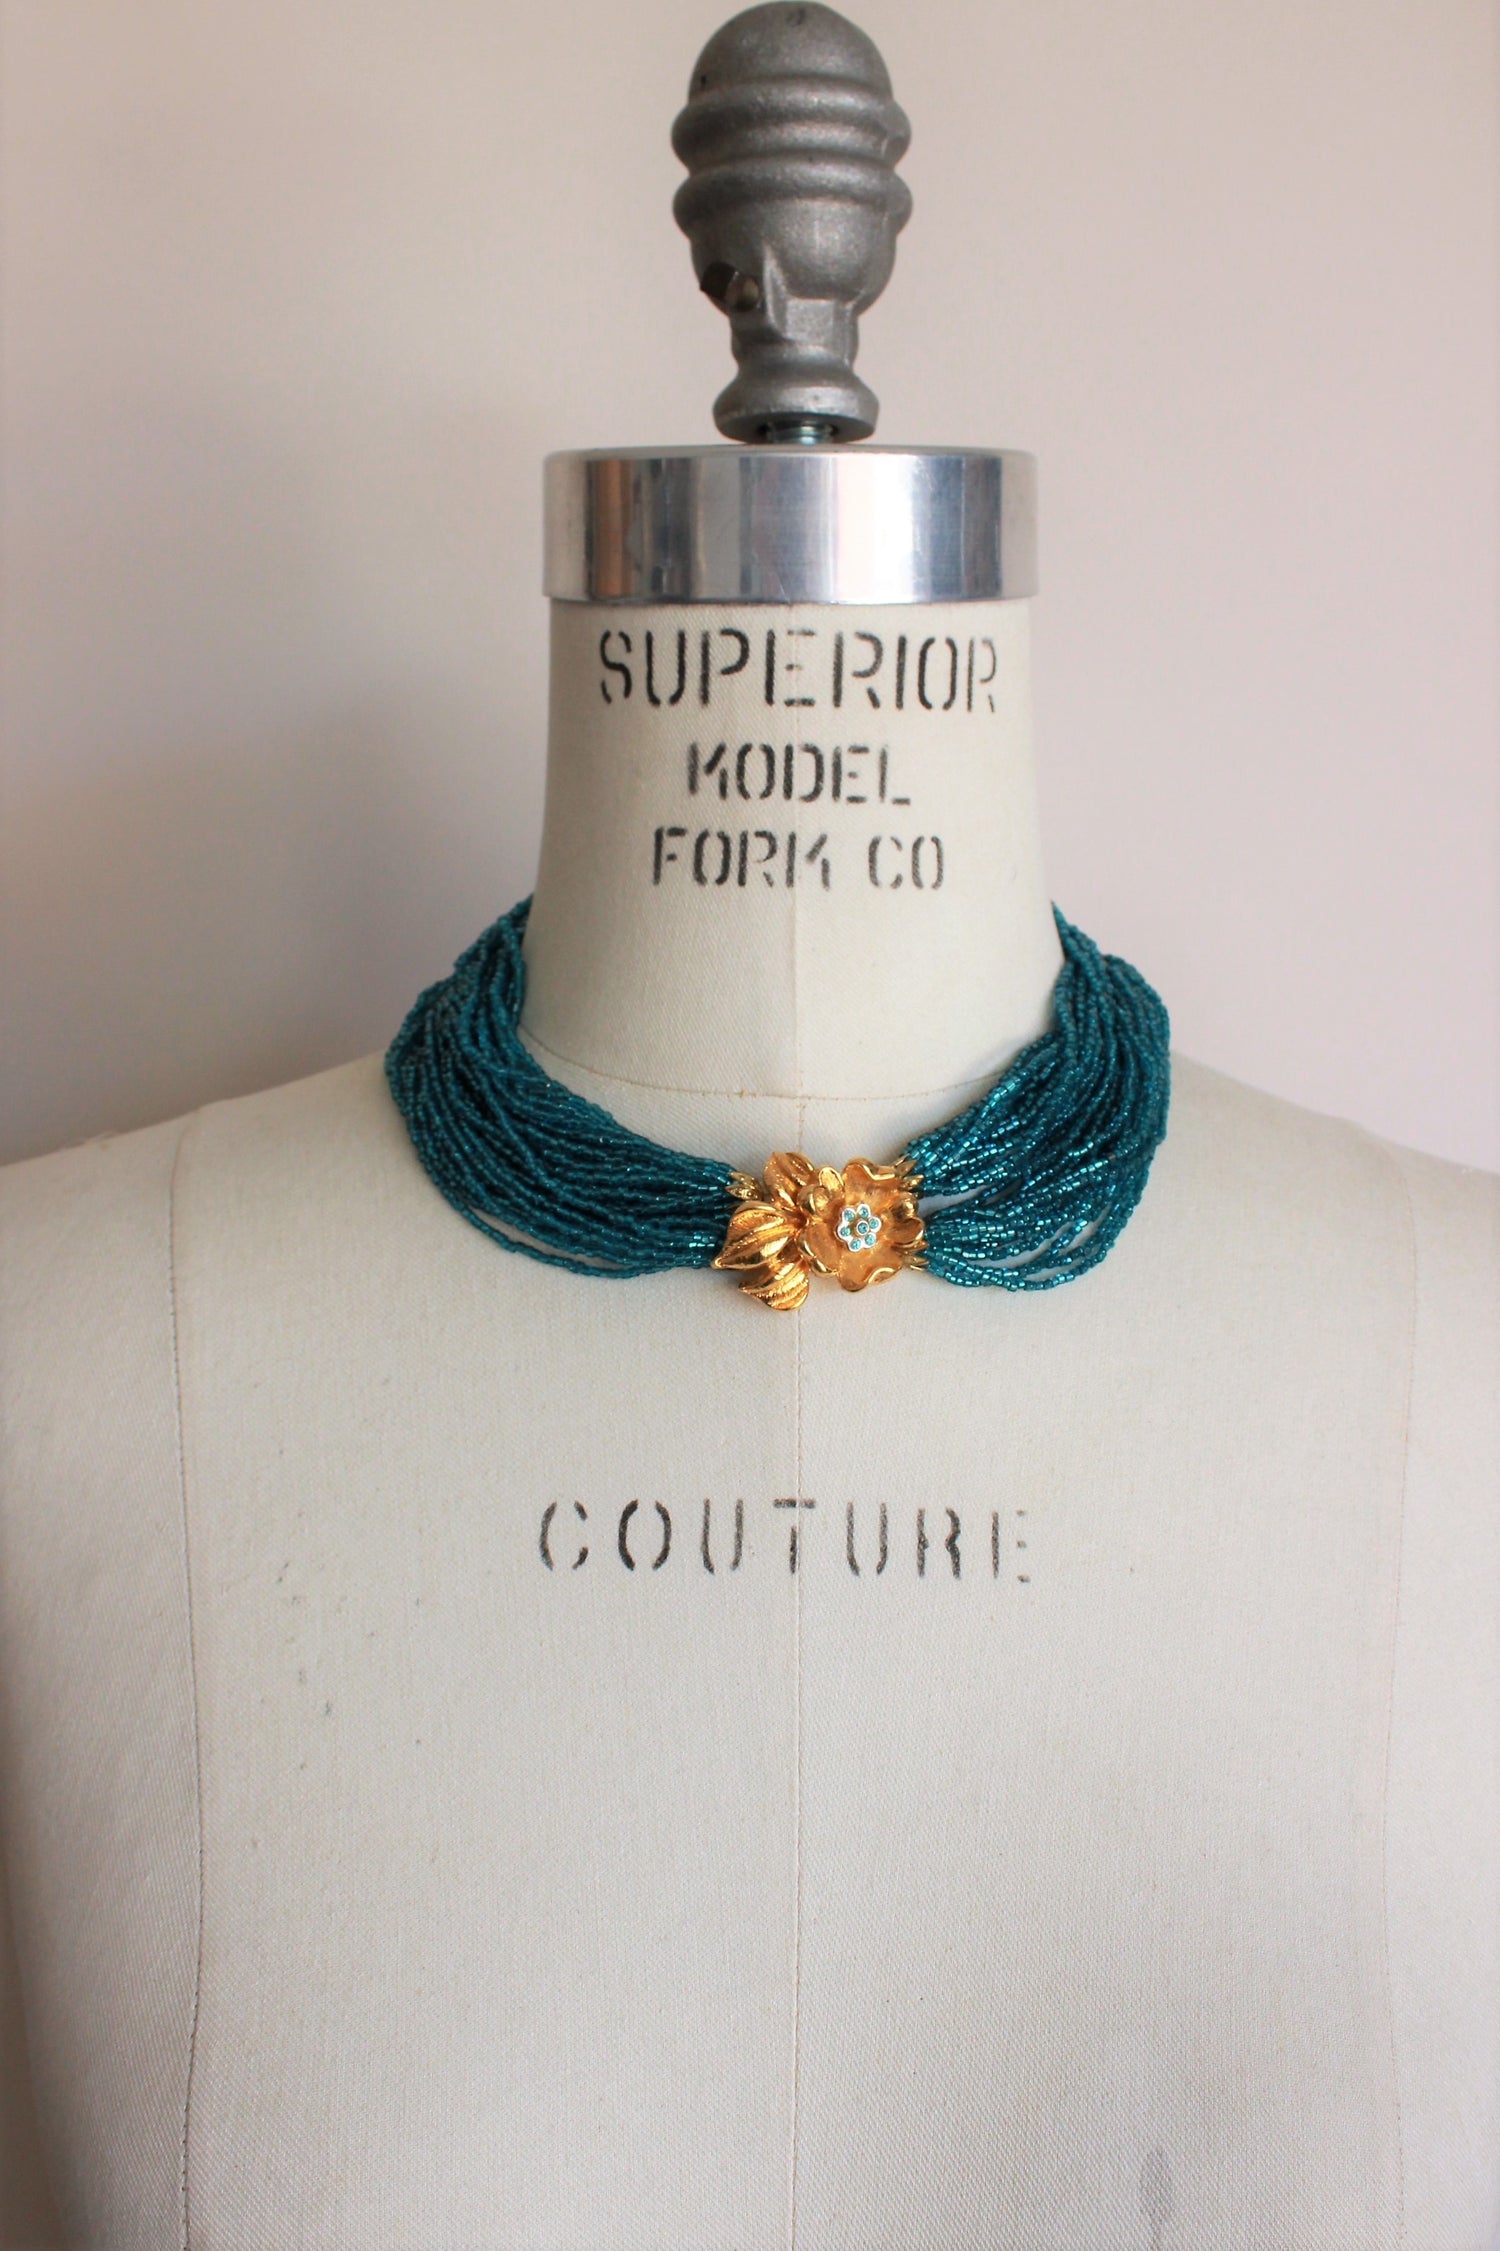 Vintage 1960s Teal Blue Multistrand Necklace With Flower Clasp